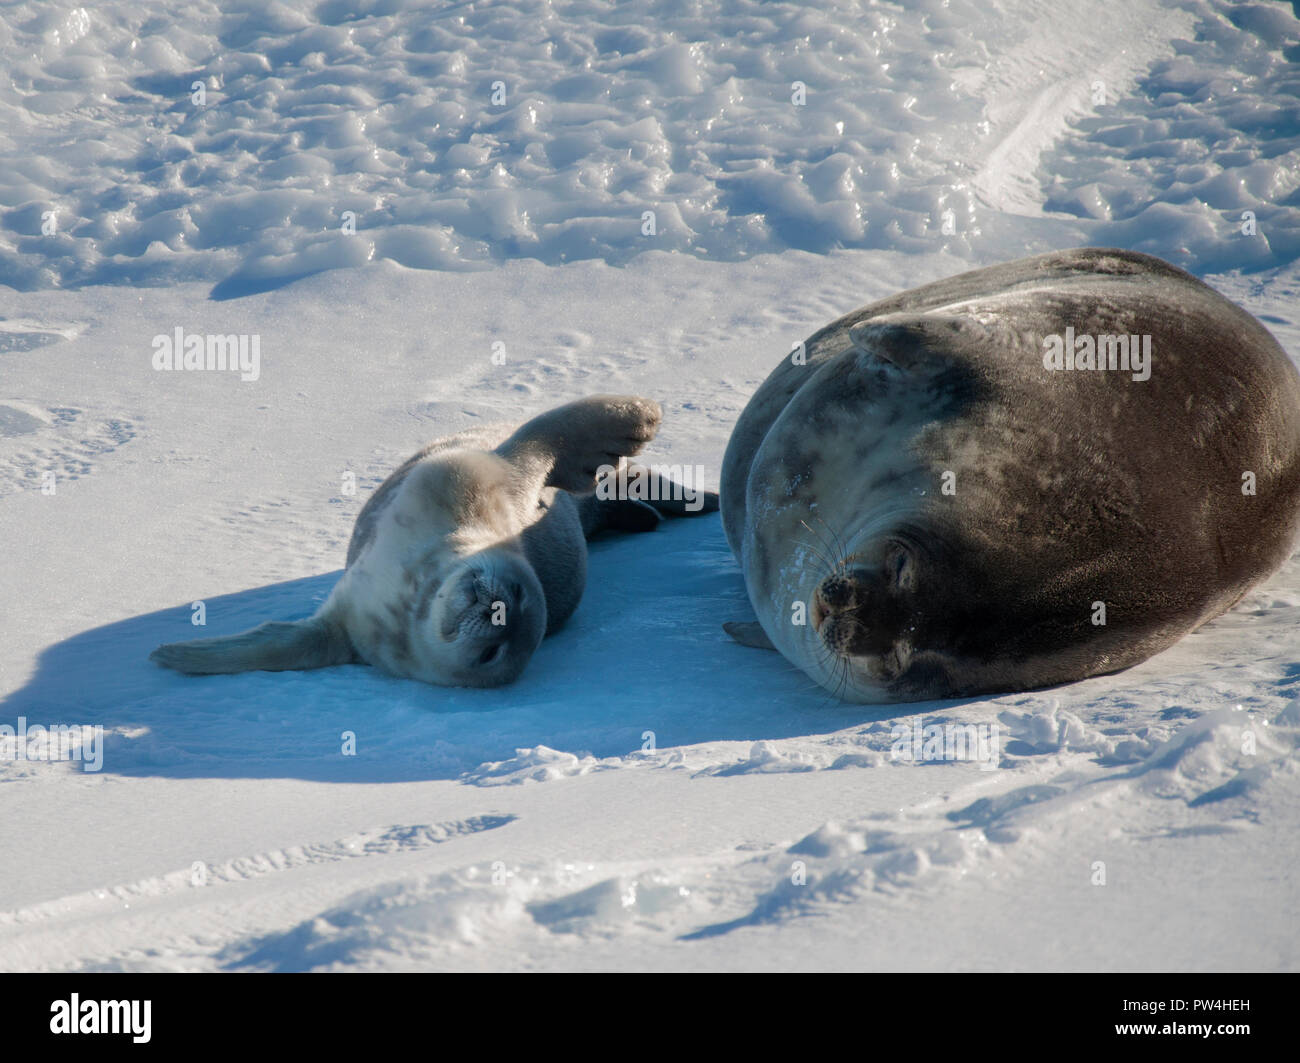 Seal - ringed seal (Pusa hispida), A young mother with a born cub lies on the snow. Antarctic. Stock Photo